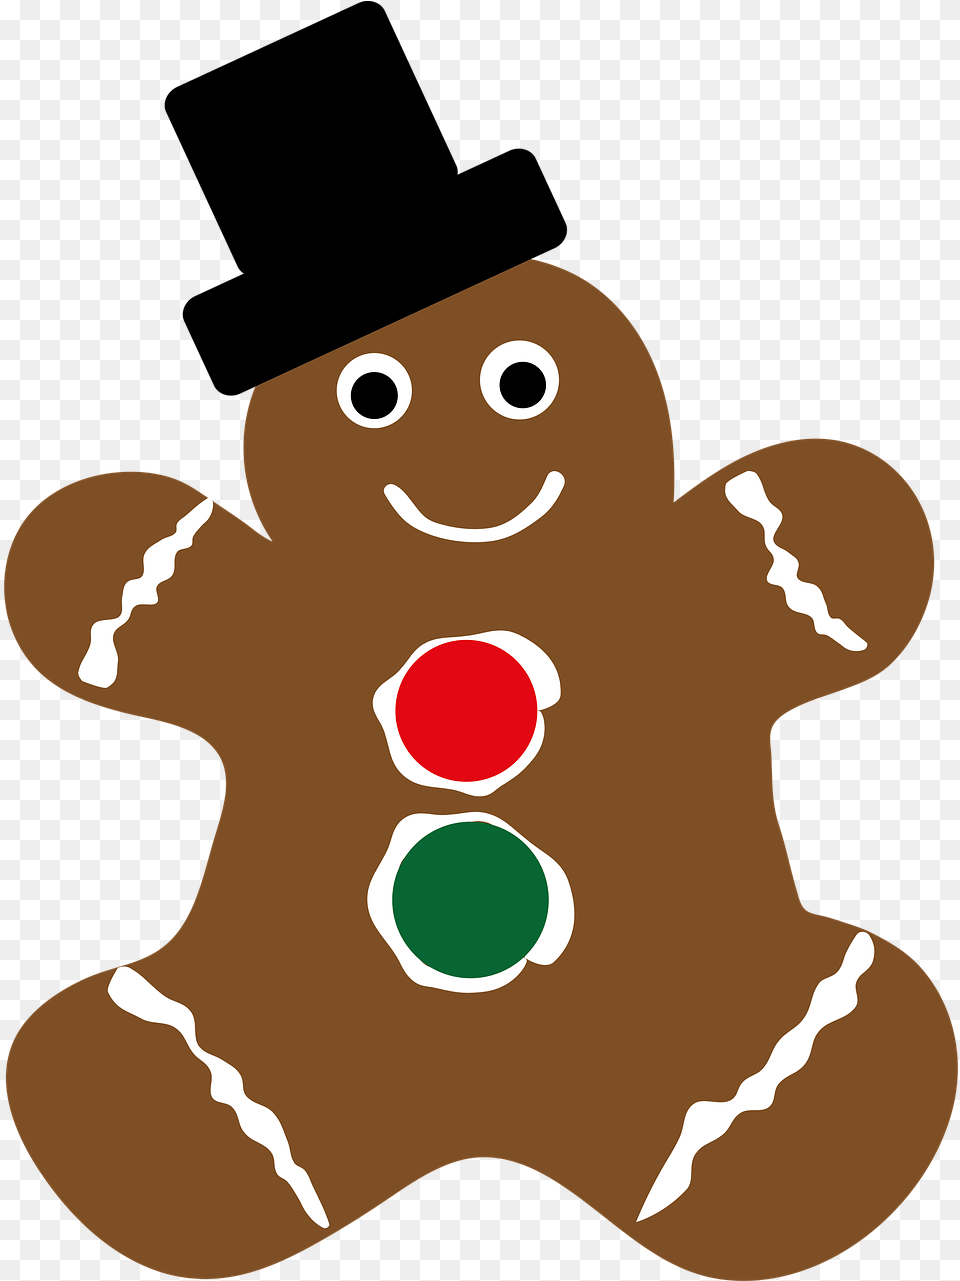 Gingerbread Christmas Cookie Free On Pixabay Dessin Pain D Pice Nol, Food, Sweets, Baby, Person Png Image